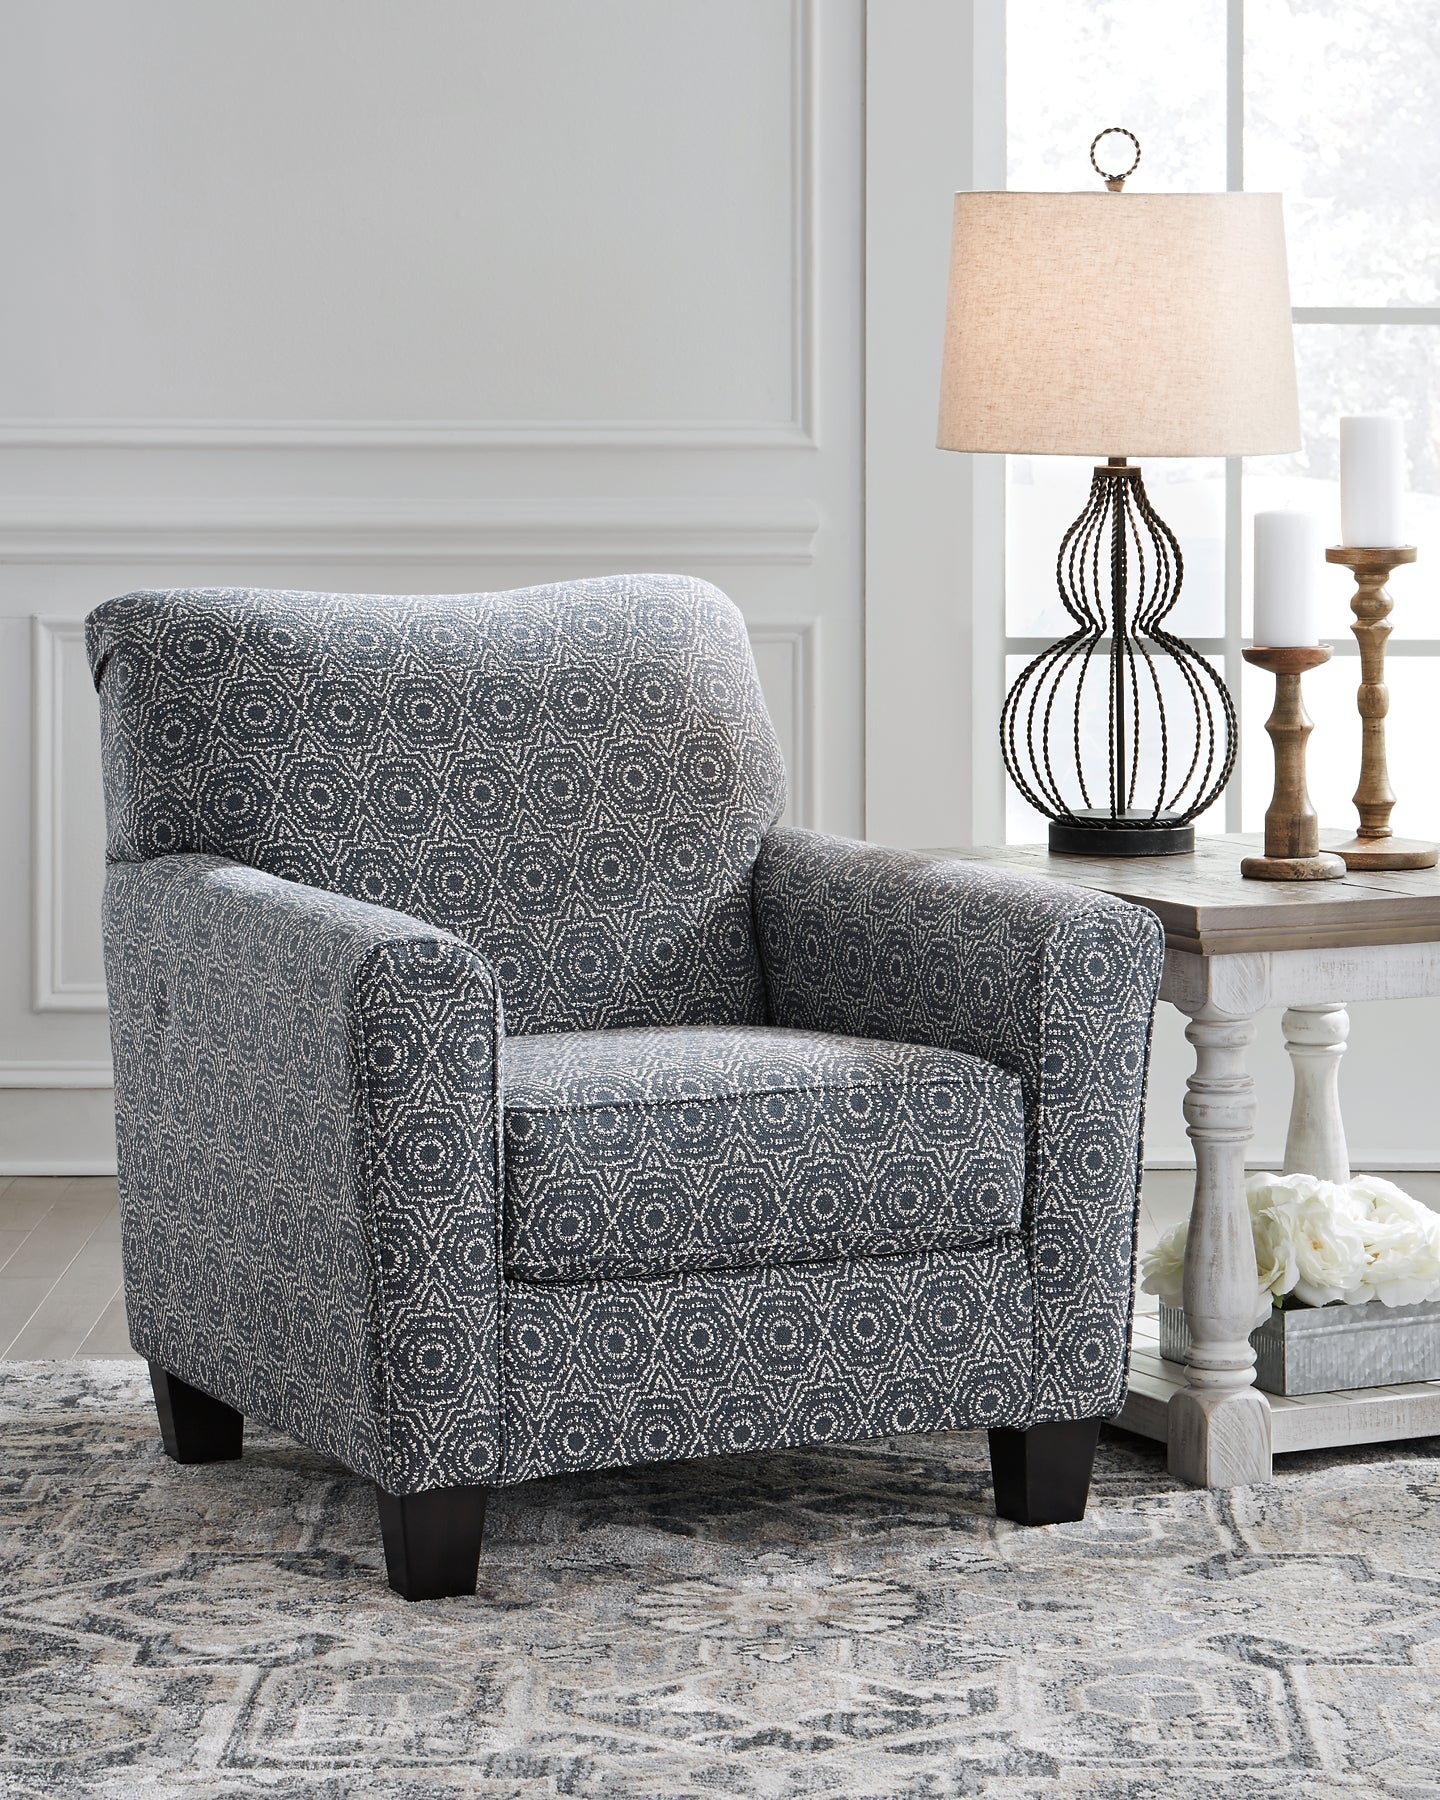 Brinsmade Accent Chair Smyrna Furniture Outlet